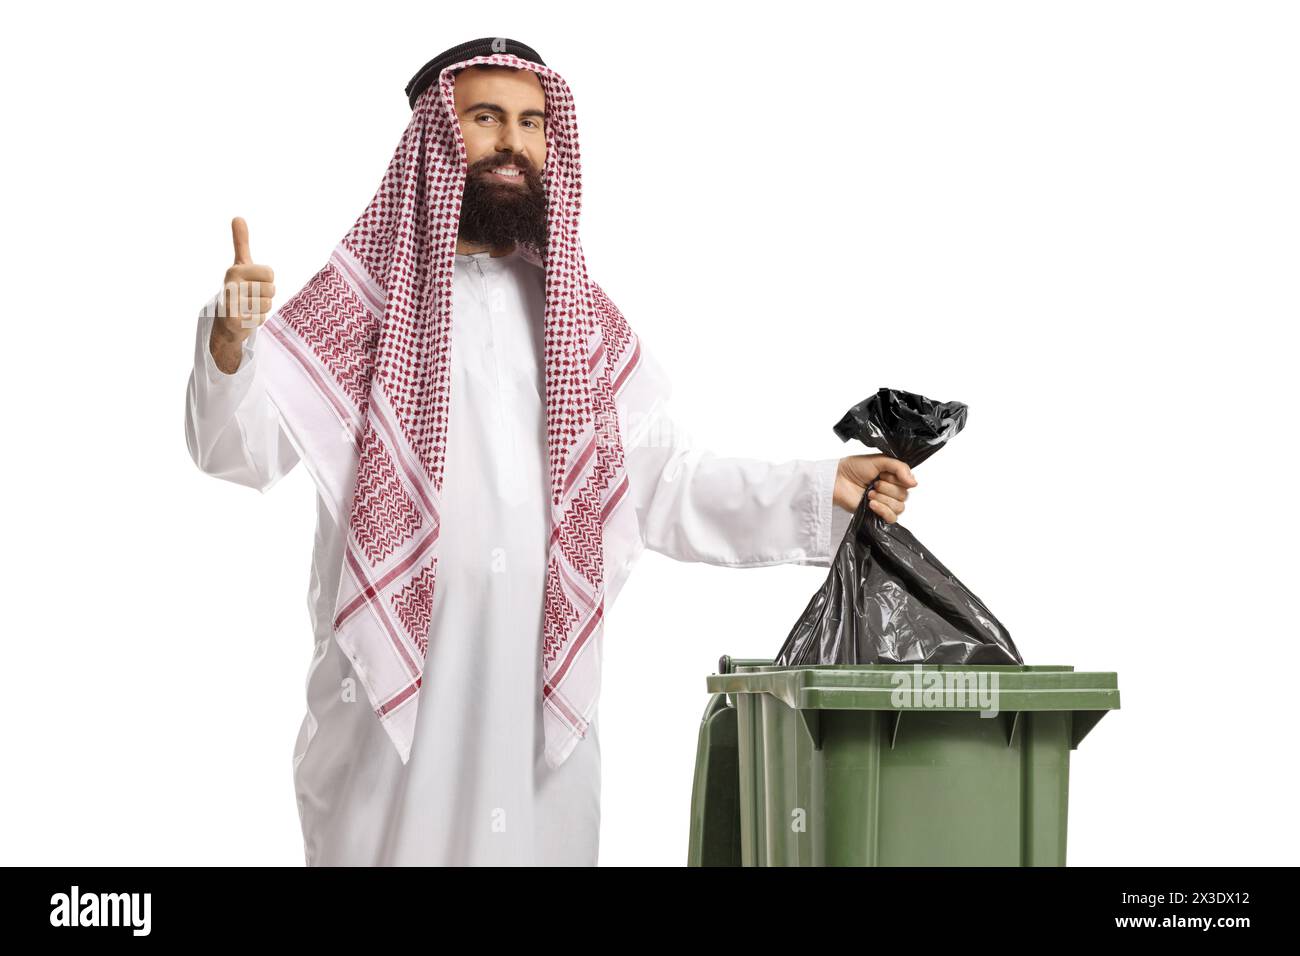 Saudi arab man throwing a plastic bag in a waste bin and showing thumbs up isolated on white background Stock Photo